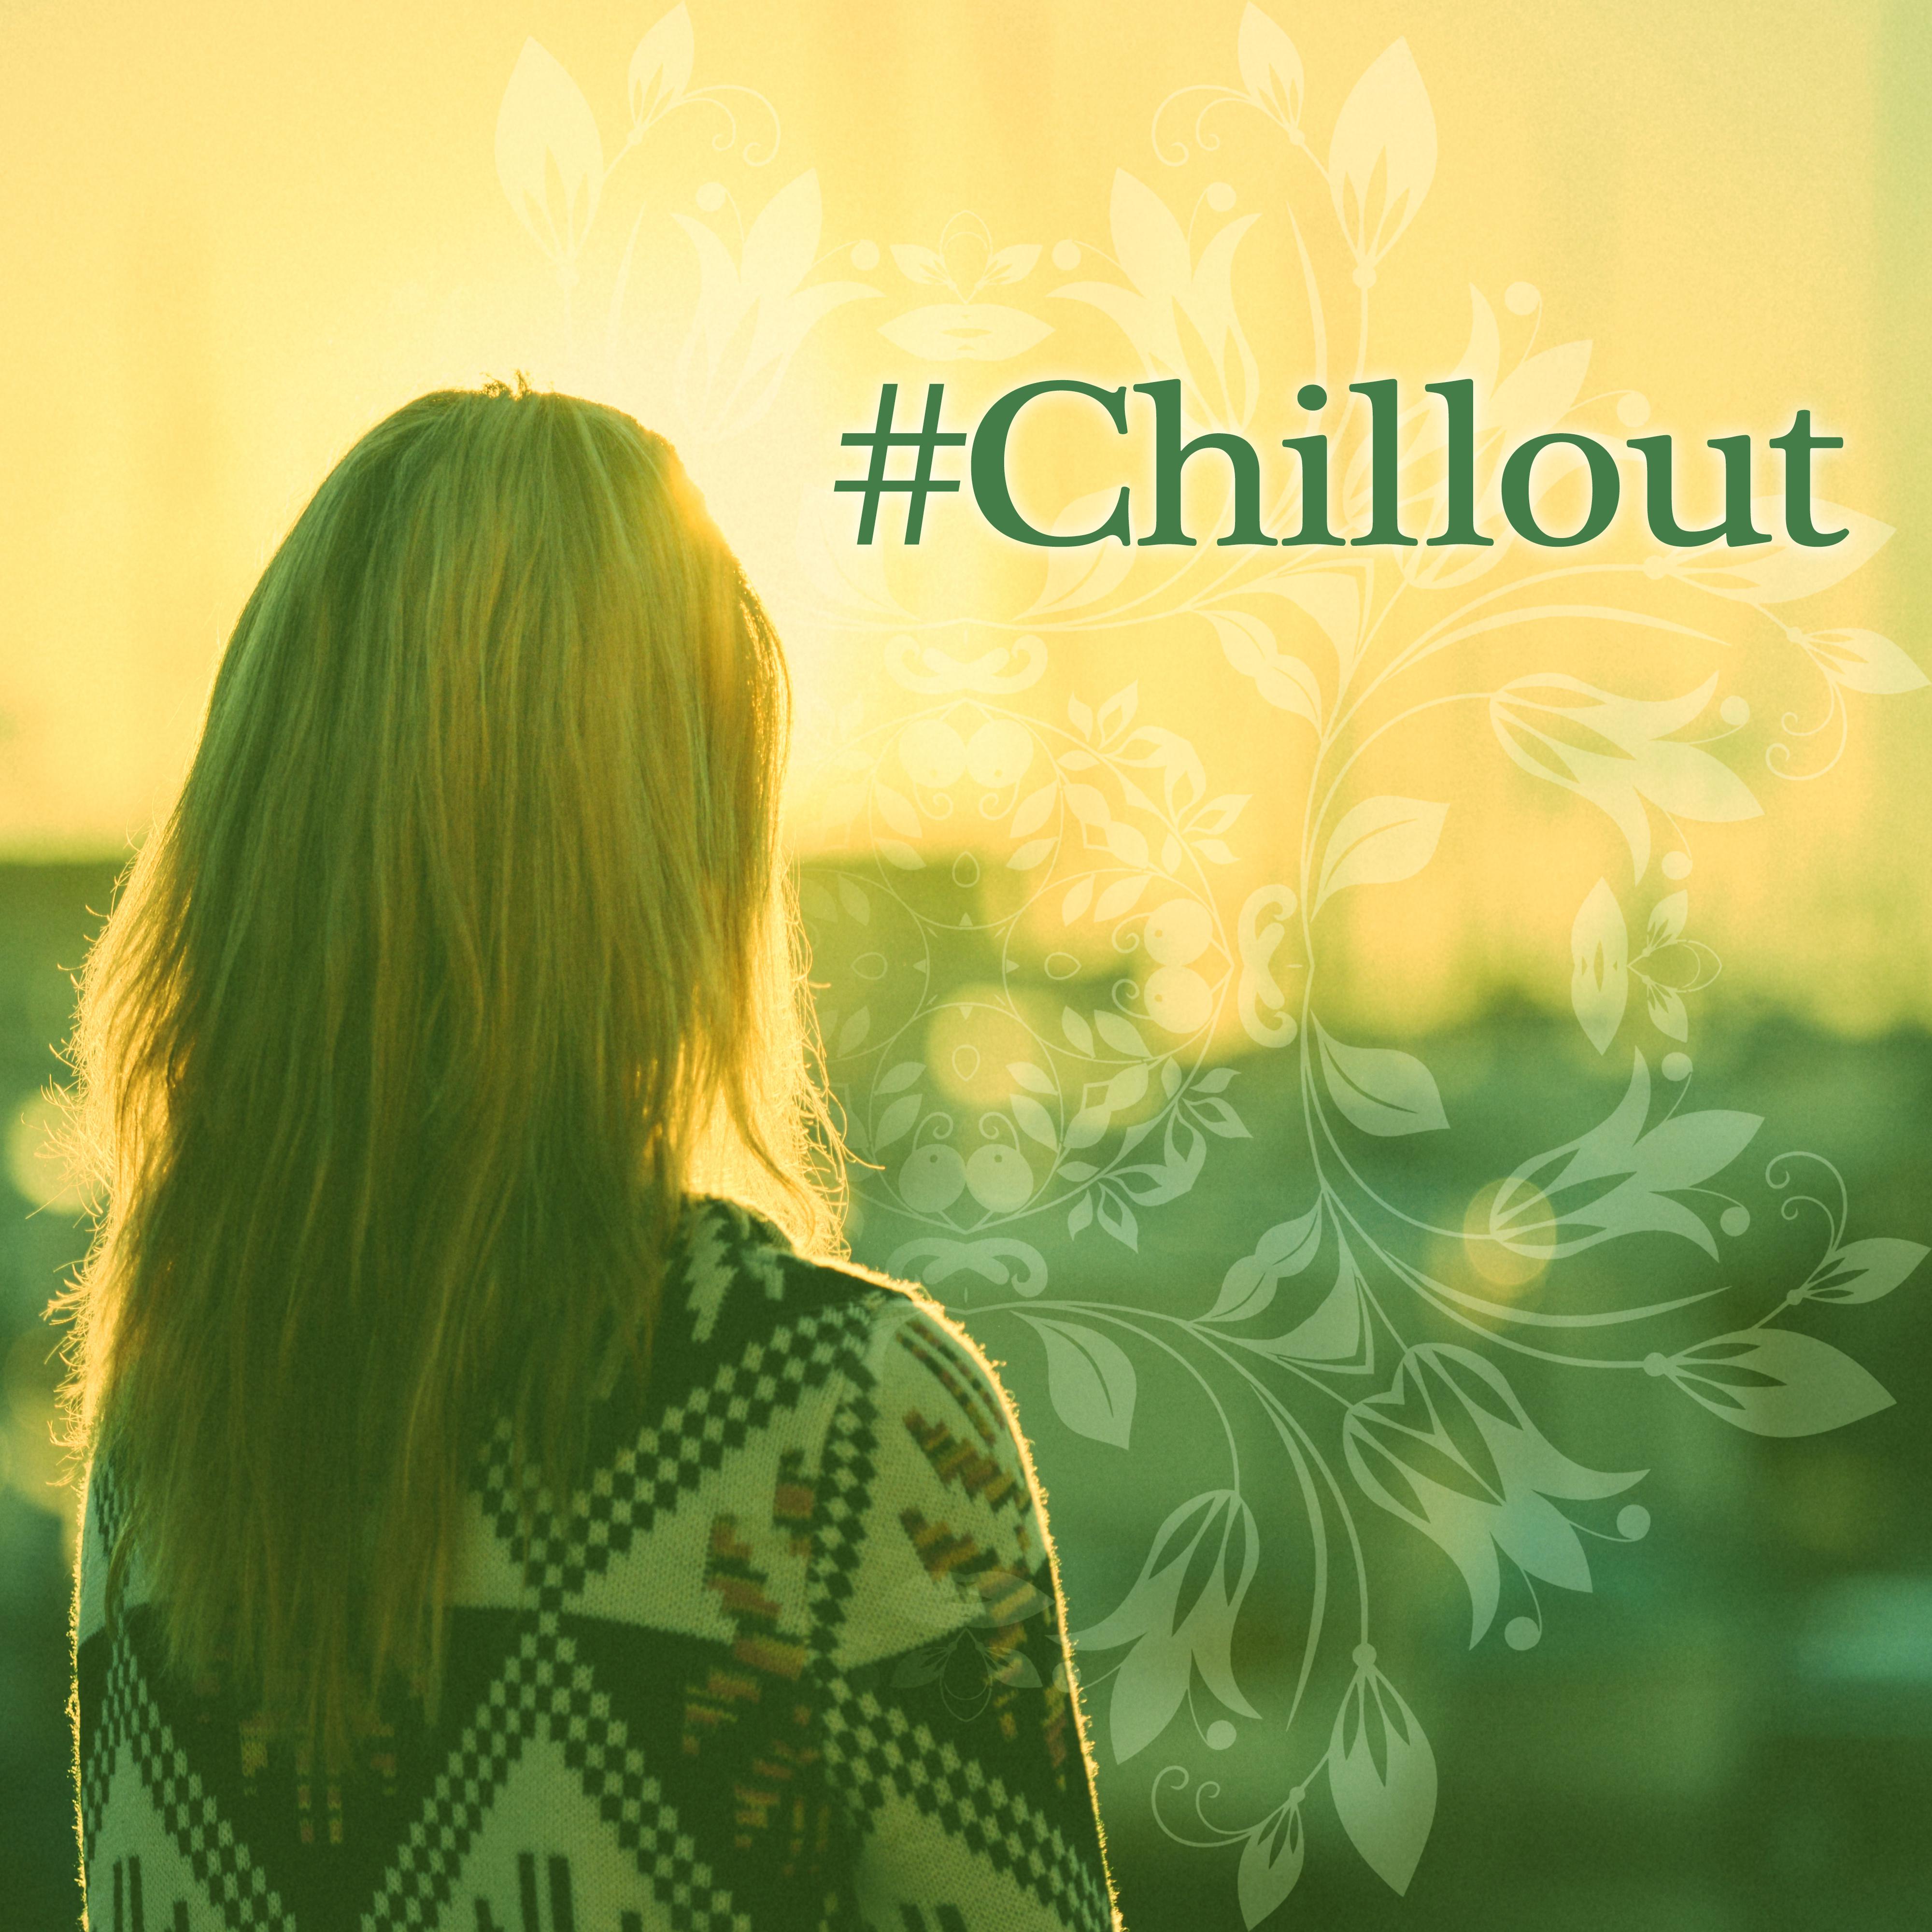 # Chillout – Chill Out Music, Total Relax Ambience, Chill Out Hits, Cool Off, Summer Relax, Ambient Lounge, Chill Out Music, Lounge Summer